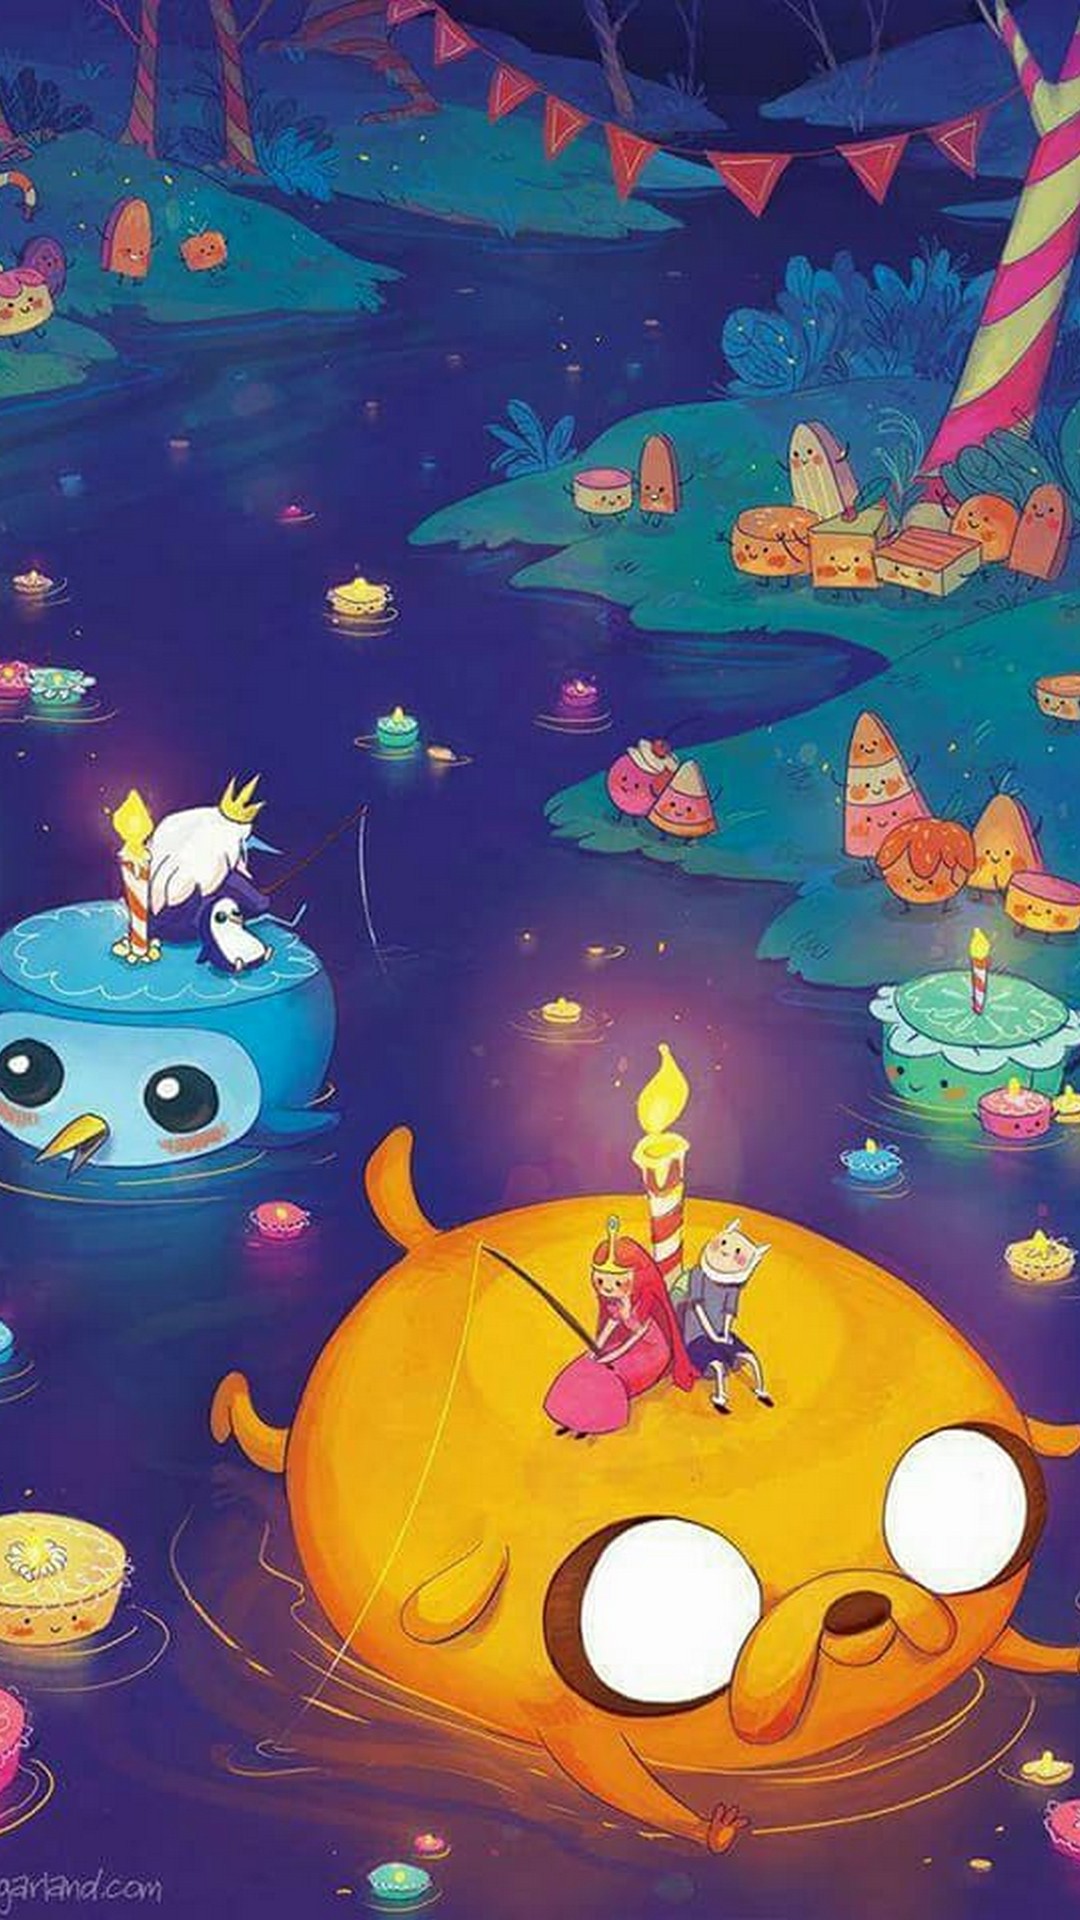 Adventure Time Wallpaper iPhone HD with image resolution 1080x1920 pixel. You can use this wallpaper as background for your desktop Computer Screensavers, Android or iPhone smartphones